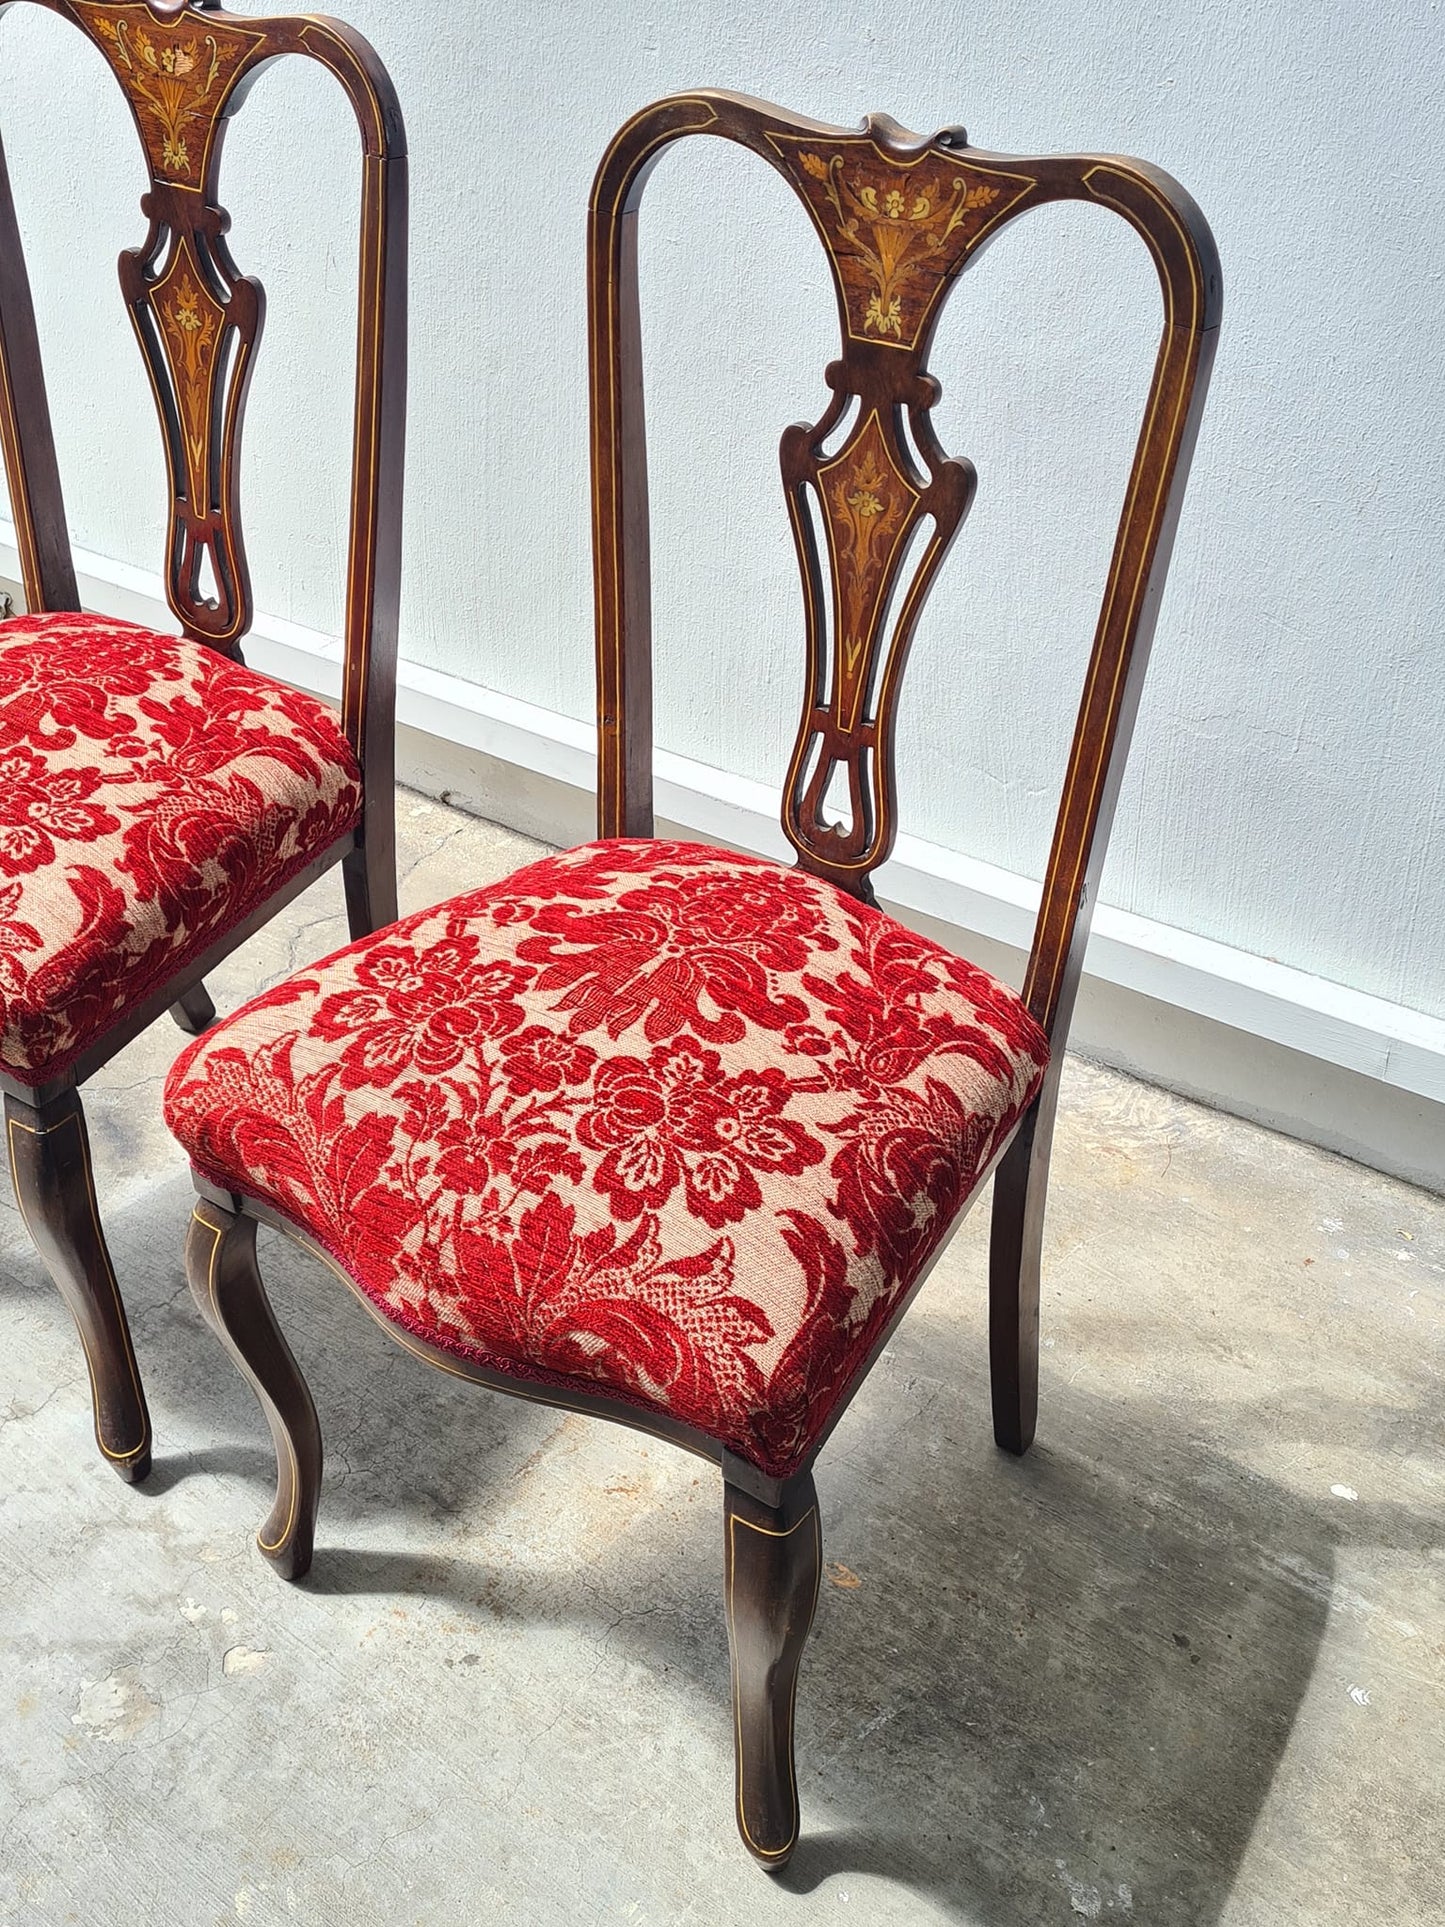 A pair of Wonderful Victorian Chair with Inlaid, newly upholstered